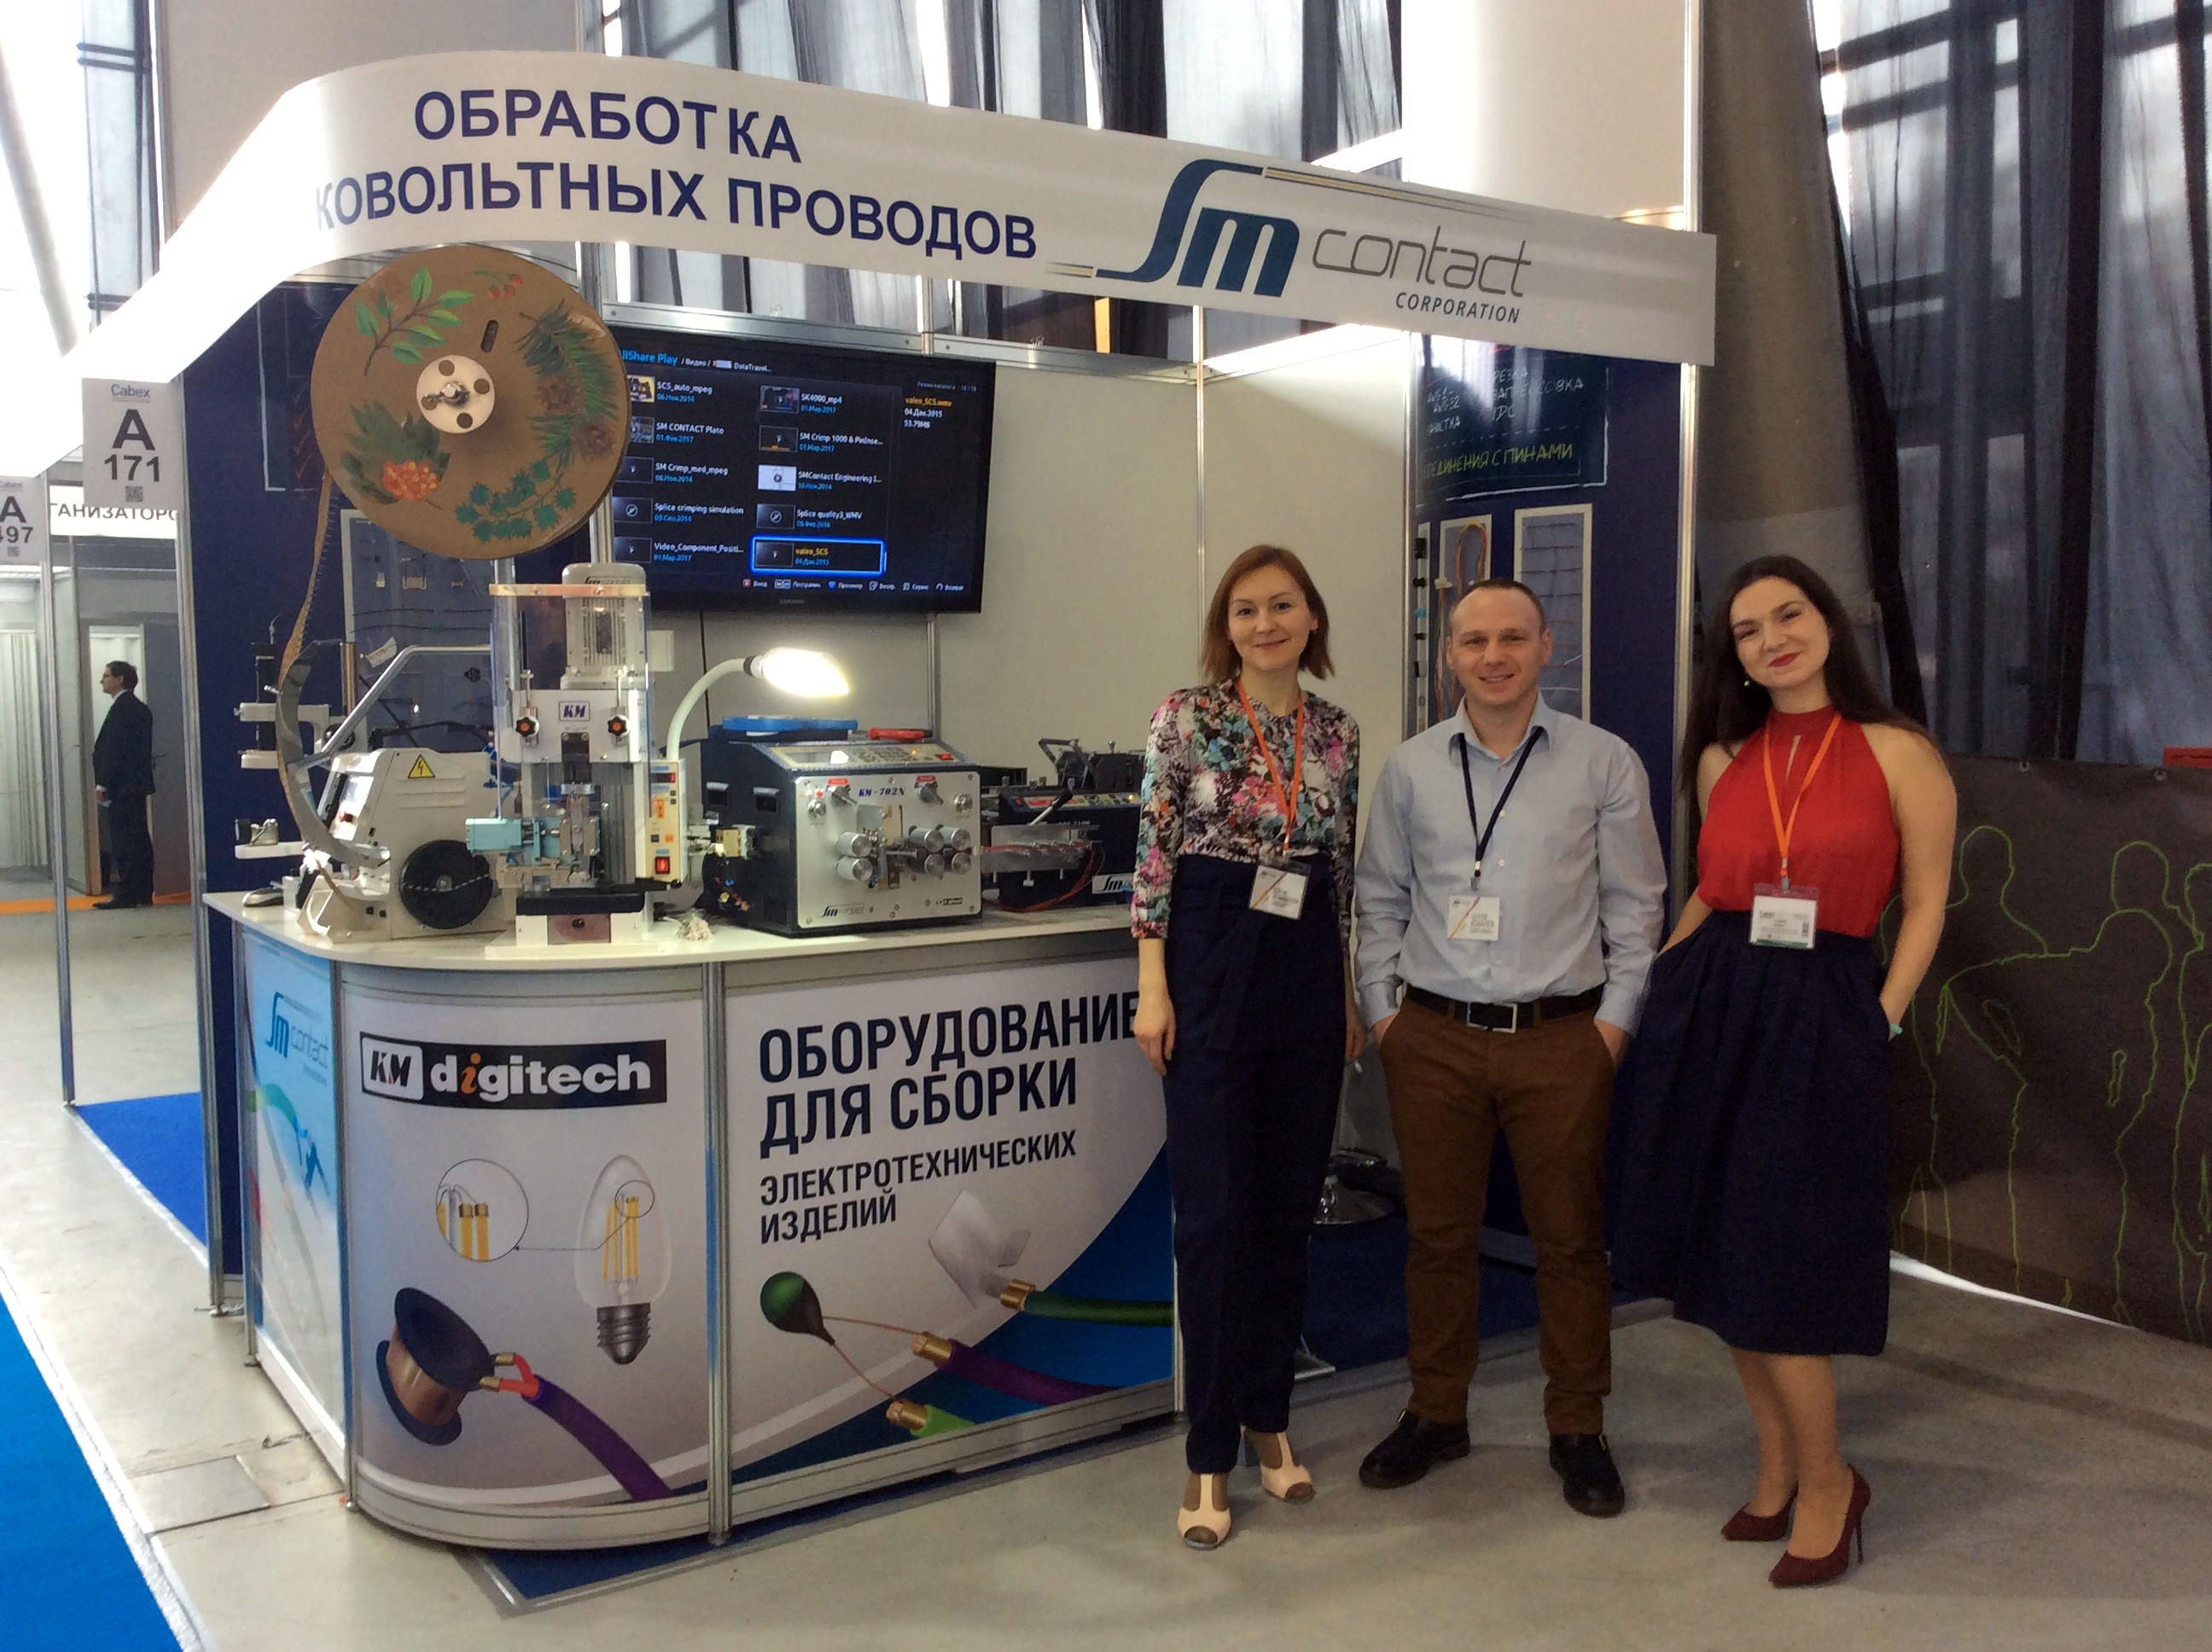 SM Contact at Cabex exhibition, Moscow